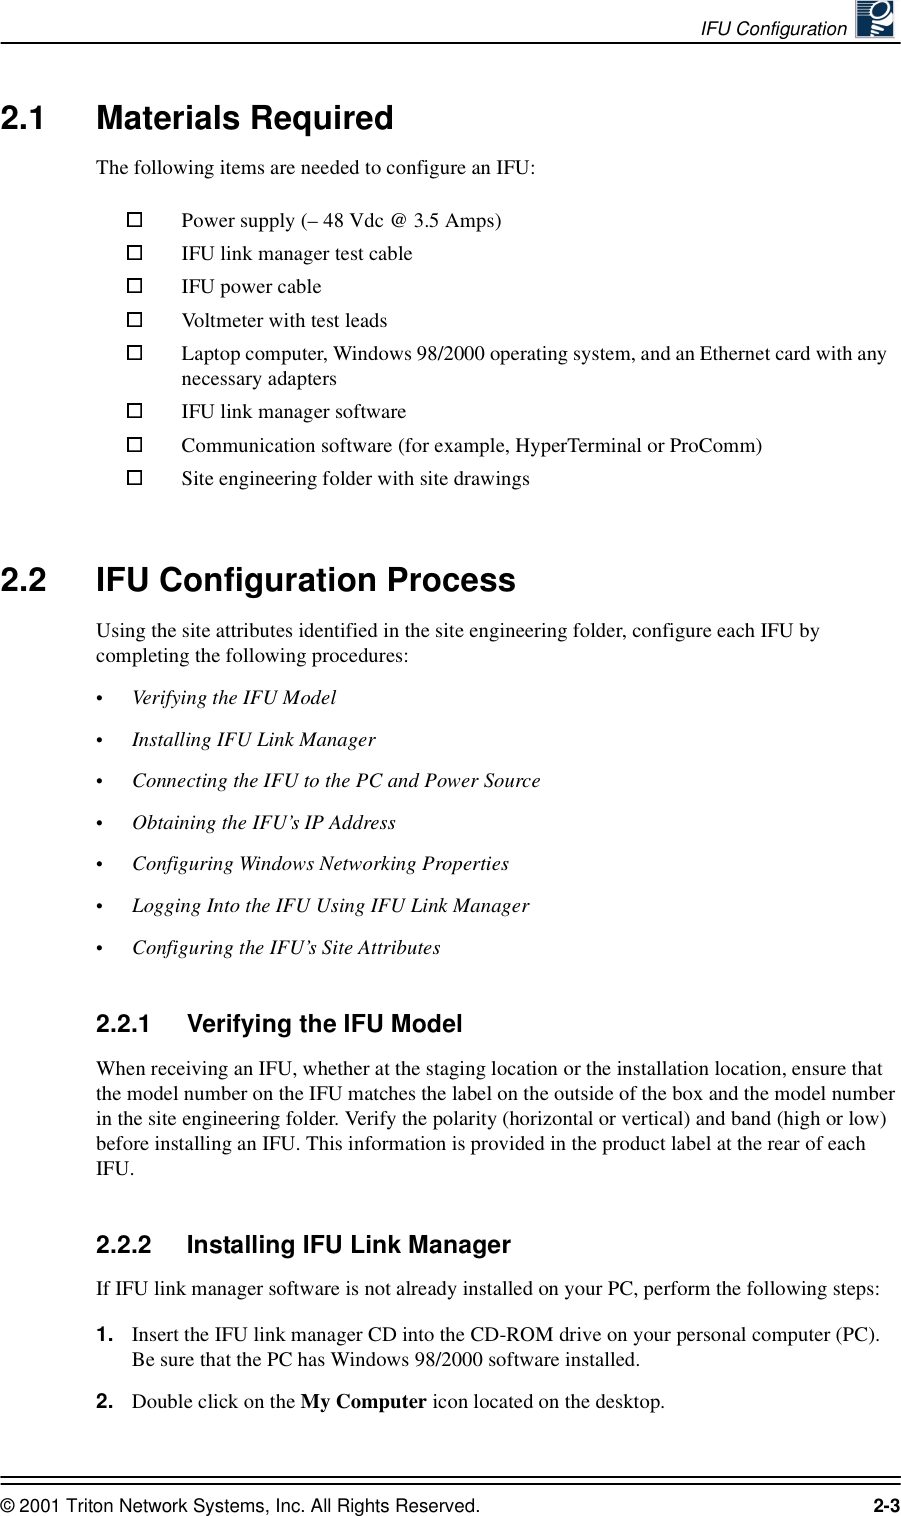 IFU Configuration © 2001 Triton Network Systems, Inc. All Rights Reserved. 2-32.1 Materials RequiredThe following items are needed to configure an IFU:2.2 IFU Configuration ProcessUsing the site attributes identified in the site engineering folder, configure each IFU by completing the following procedures:•Verifying the IFU Model•Installing IFU Link Manager•Connecting the IFU to the PC and Power Source•Obtaining the IFU’s IP Address•Configuring Windows Networking Properties•Logging Into the IFU Using IFU Link Manager•Configuring the IFU’s Site Attributes2.2.1 Verifying the IFU Model When receiving an IFU, whether at the staging location or the installation location, ensure that the model number on the IFU matches the label on the outside of the box and the model number in the site engineering folder. Verify the polarity (horizontal or vertical) and band (high or low) before installing an IFU. This information is provided in the product label at the rear of each IFU.2.2.2 Installing IFU Link ManagerIf IFU link manager software is not already installed on your PC, perform the following steps: 1. Insert the IFU link manager CD into the CD-ROM drive on your personal computer (PC). Be sure that the PC has Windows 98/2000 software installed.2. Double click on the My Computer icon located on the desktop.Power supply (– 48 Vdc @ 3.5 Amps)IFU link manager test cable IFU power cableVoltmeter with test leadsLaptop computer, Windows 98/2000 operating system, and an Ethernet card with any necessary adaptersIFU link manager softwareCommunication software (for example, HyperTerminal or ProComm)Site engineering folder with site drawings